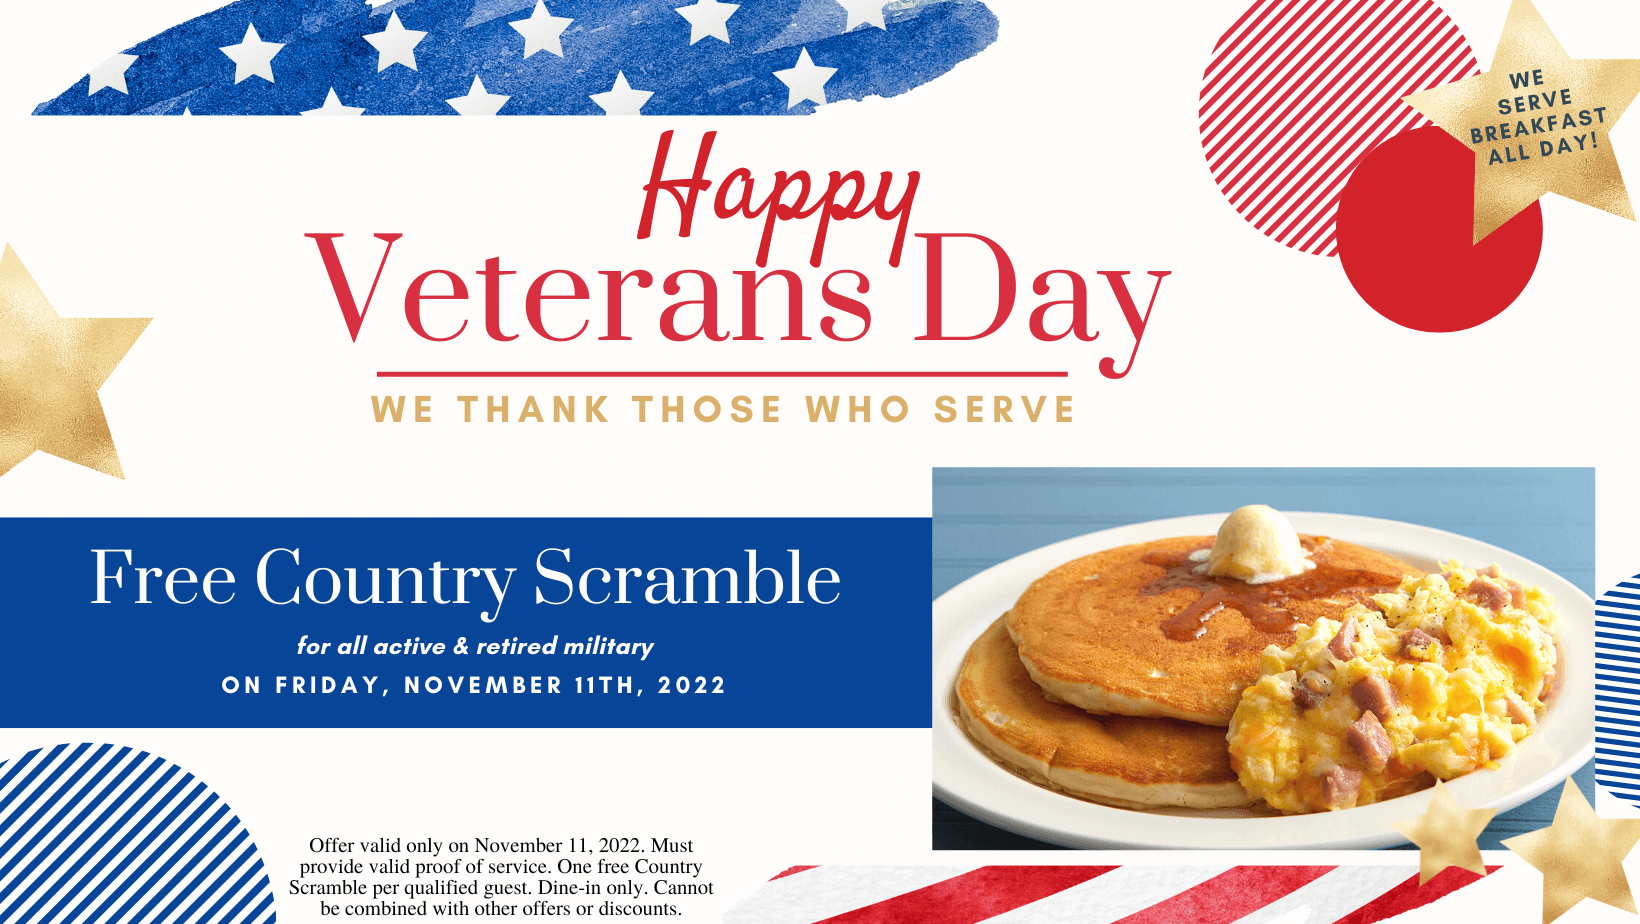 Country Kitchen Restaurants FREE Country Scramble on Veterans Day